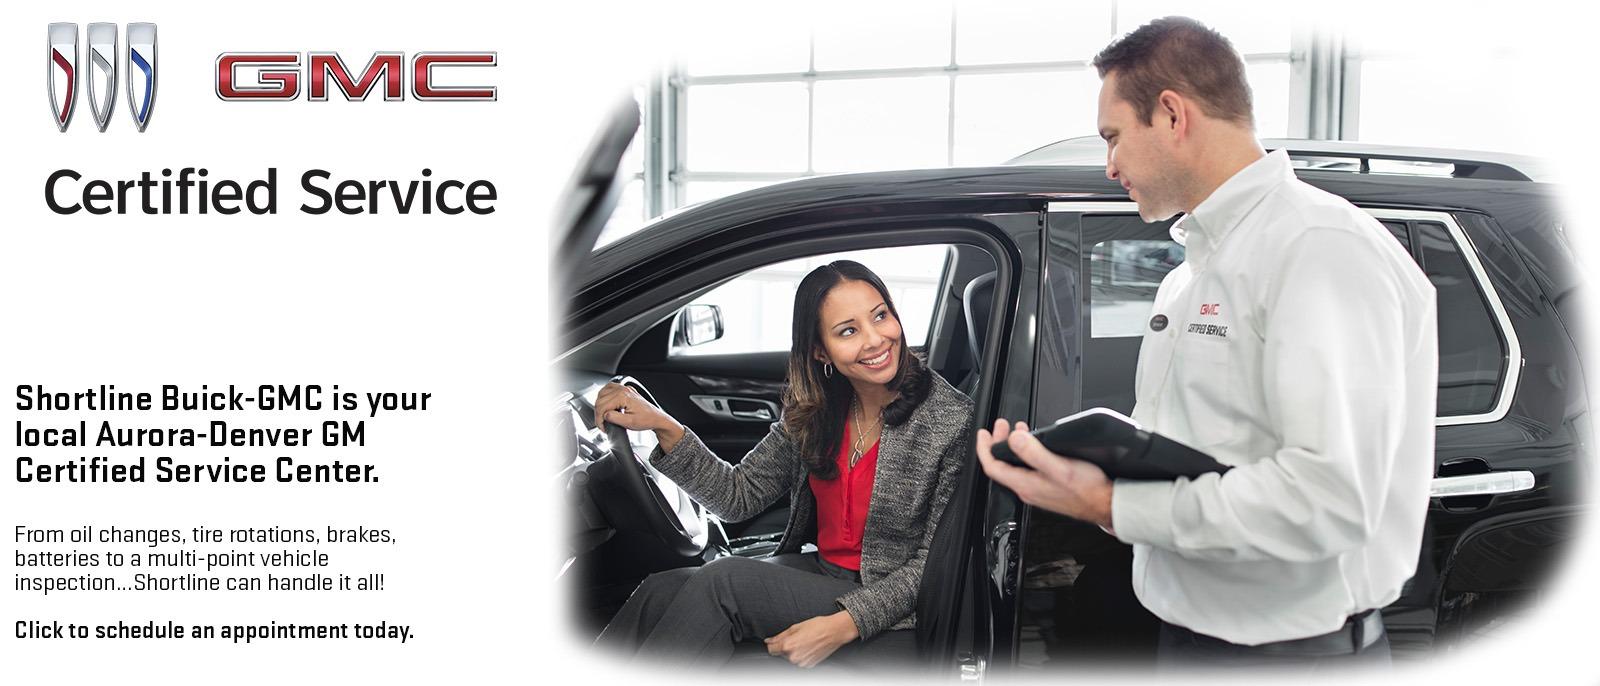 Get Certified Service at Shortline Buick-GMC